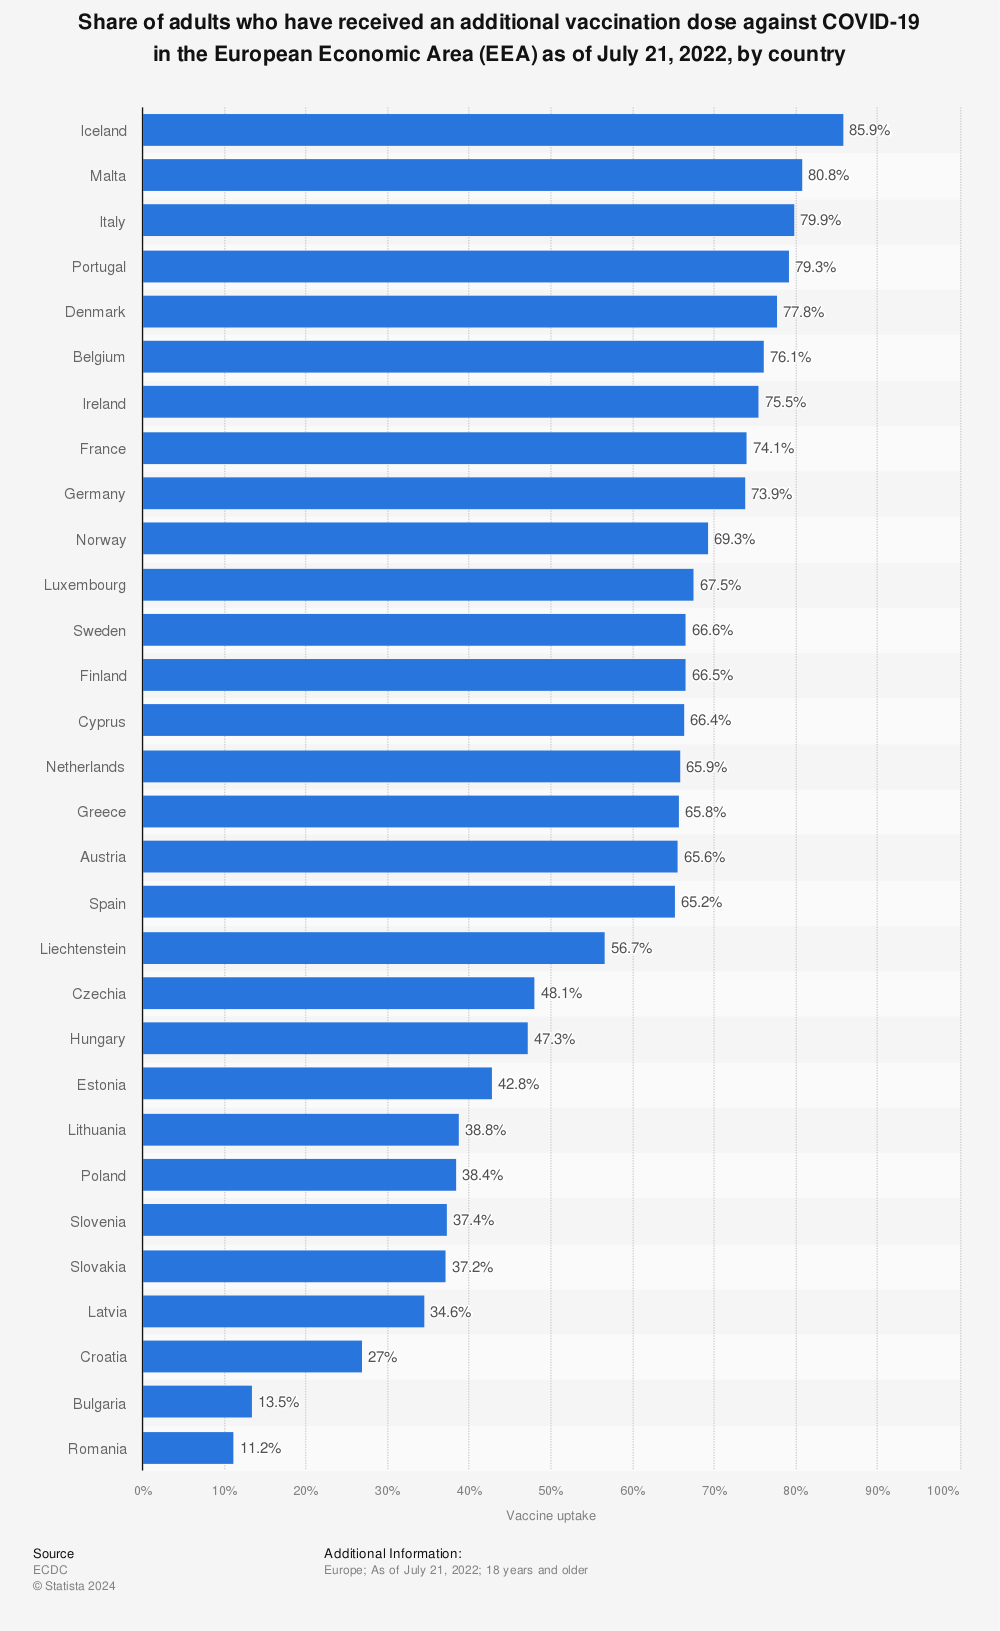 Statistic: Share of adults who have received an additional vaccination dose against COVID-19 in the European Economic Area (EEA) as of May 19, 2022, by country | Statista